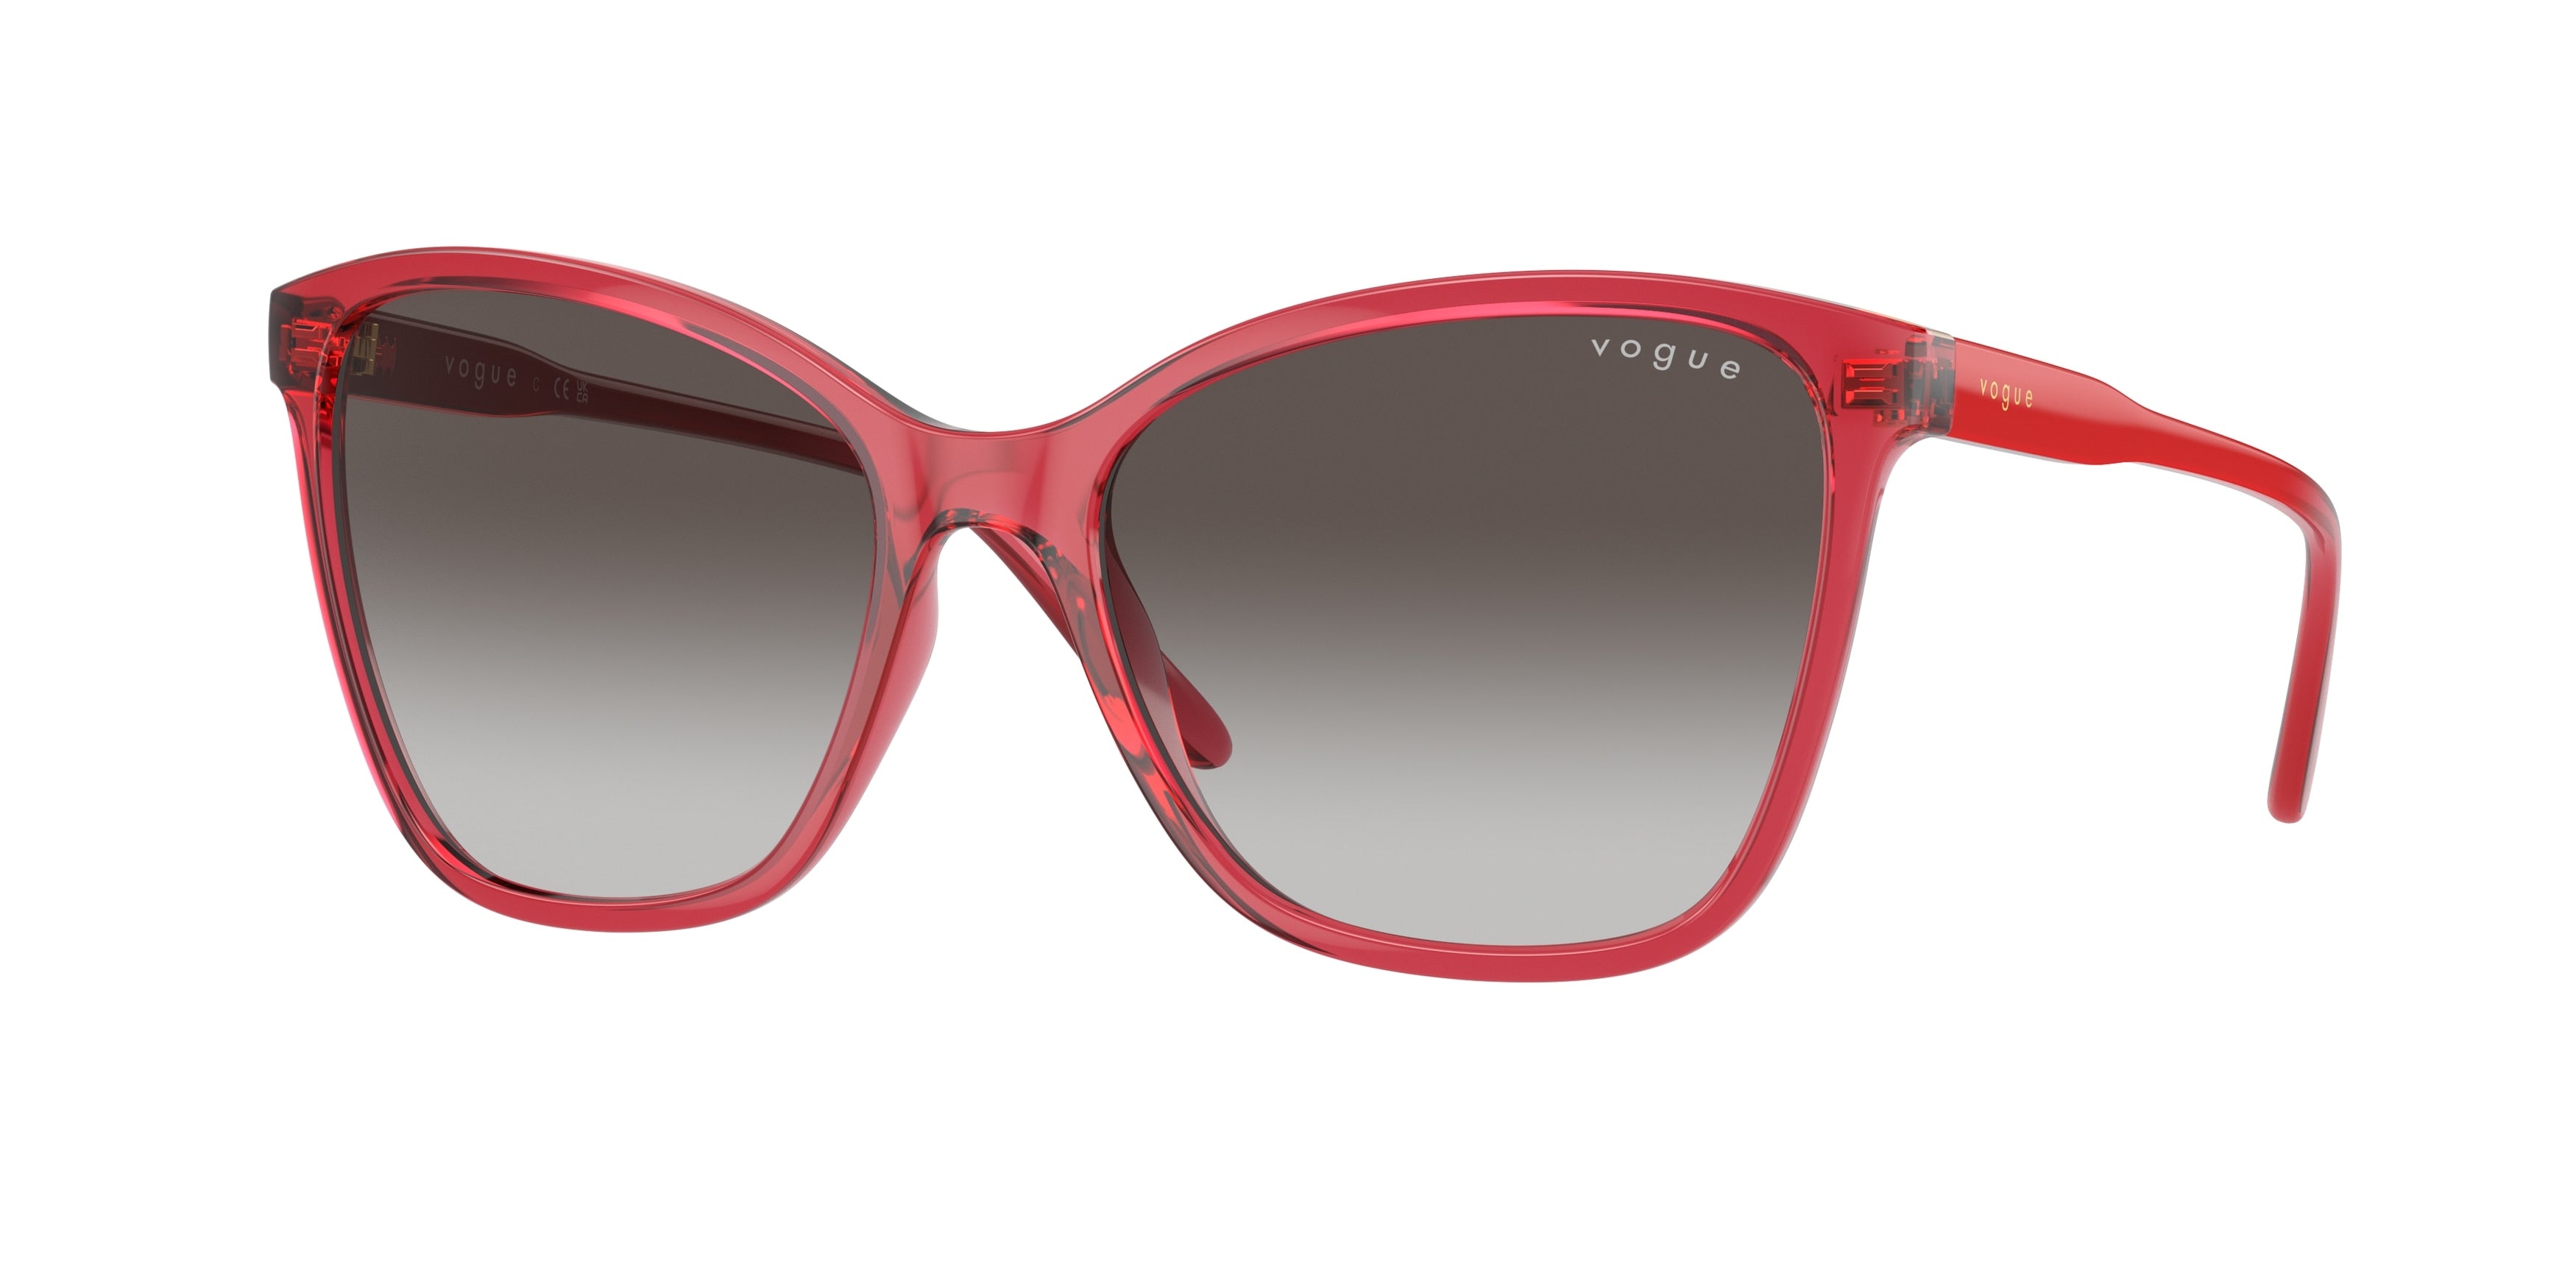 Vogue VO5520S Butterfly Sunglasses  30848G-Transparent Red 56-140-17 - Color Map Red